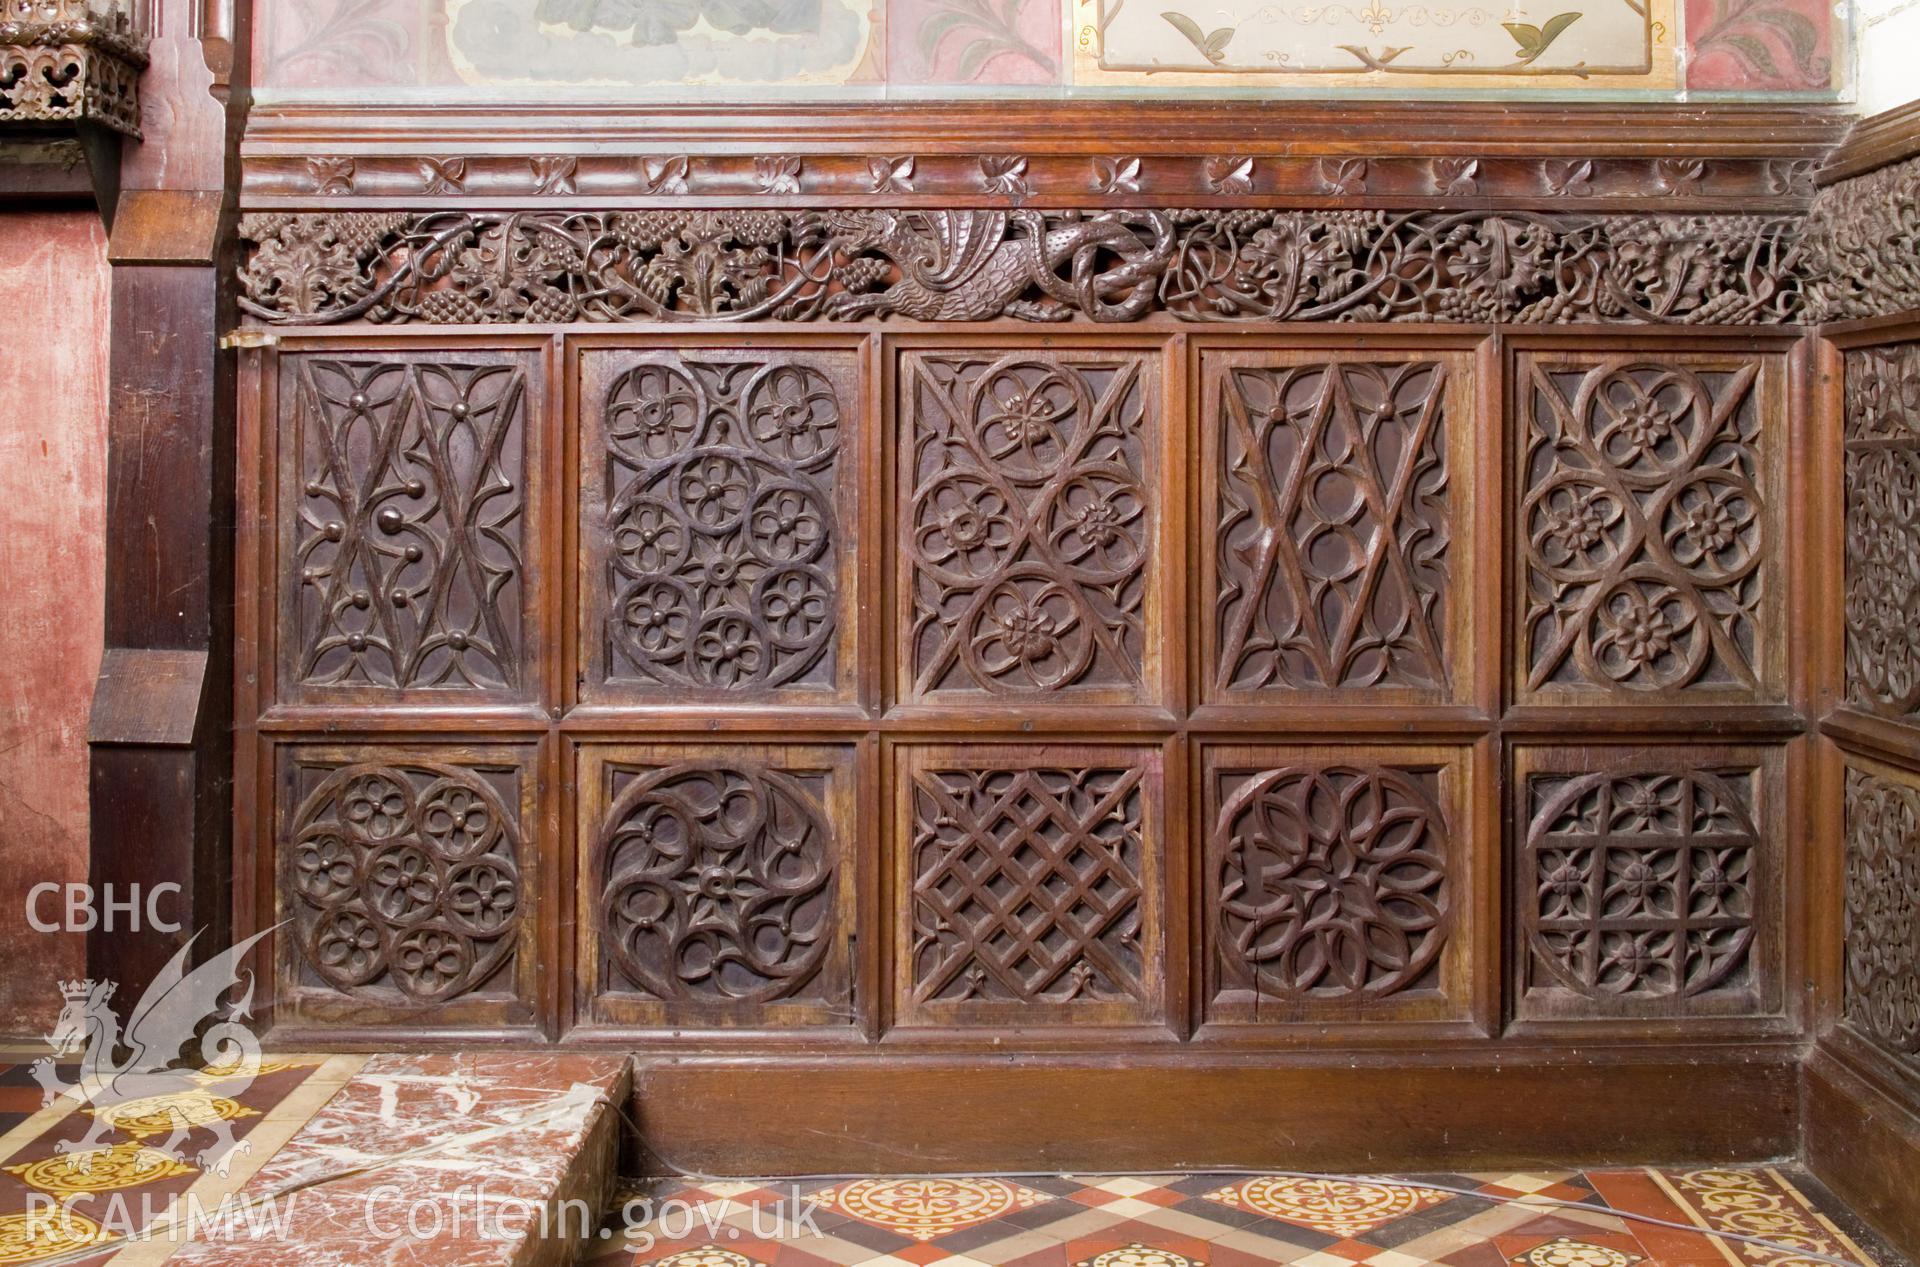 Re-used carved panels to right of altar.